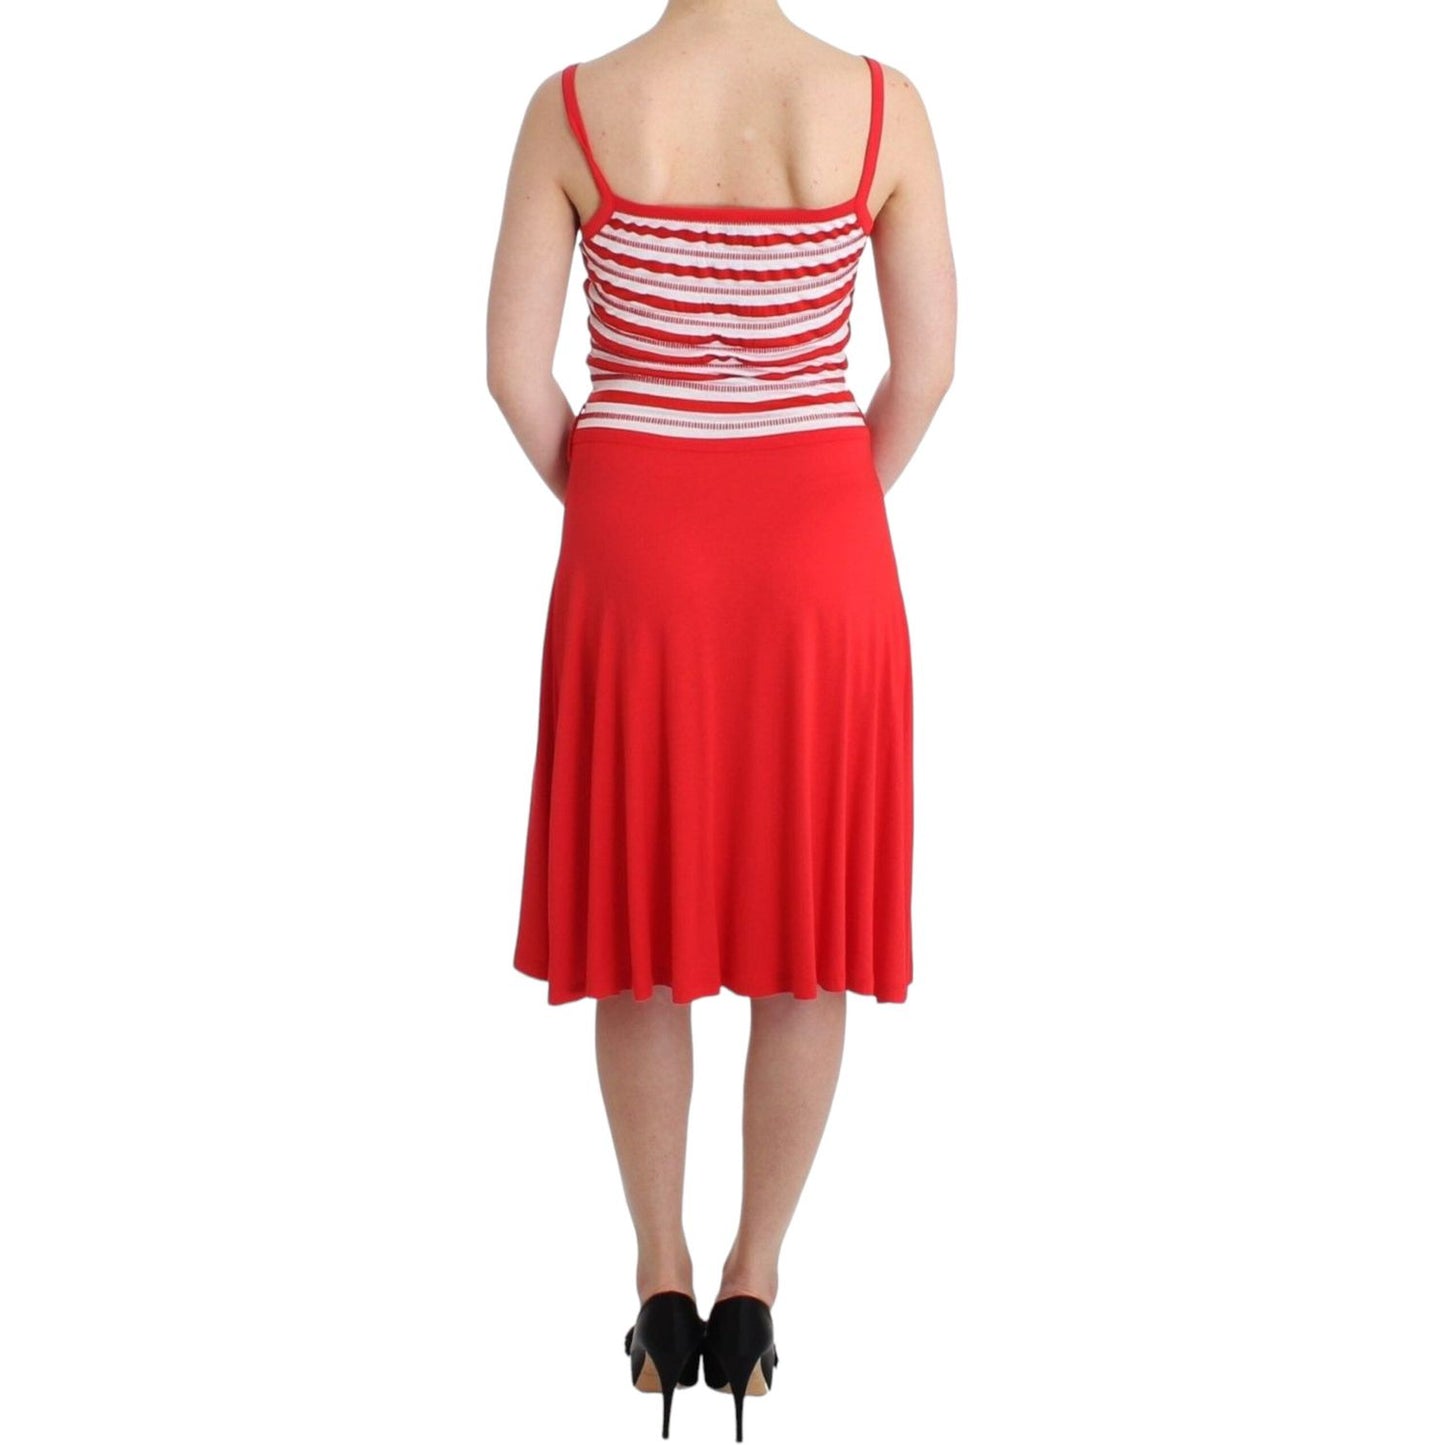 Roccobarocco Chic Audrey Jersey Line Knee-Length Dress red-striped-jersey-a-line-dress 2781-white-sheath-dress-2-1-scaled-c11ebfef-8a1.jpg